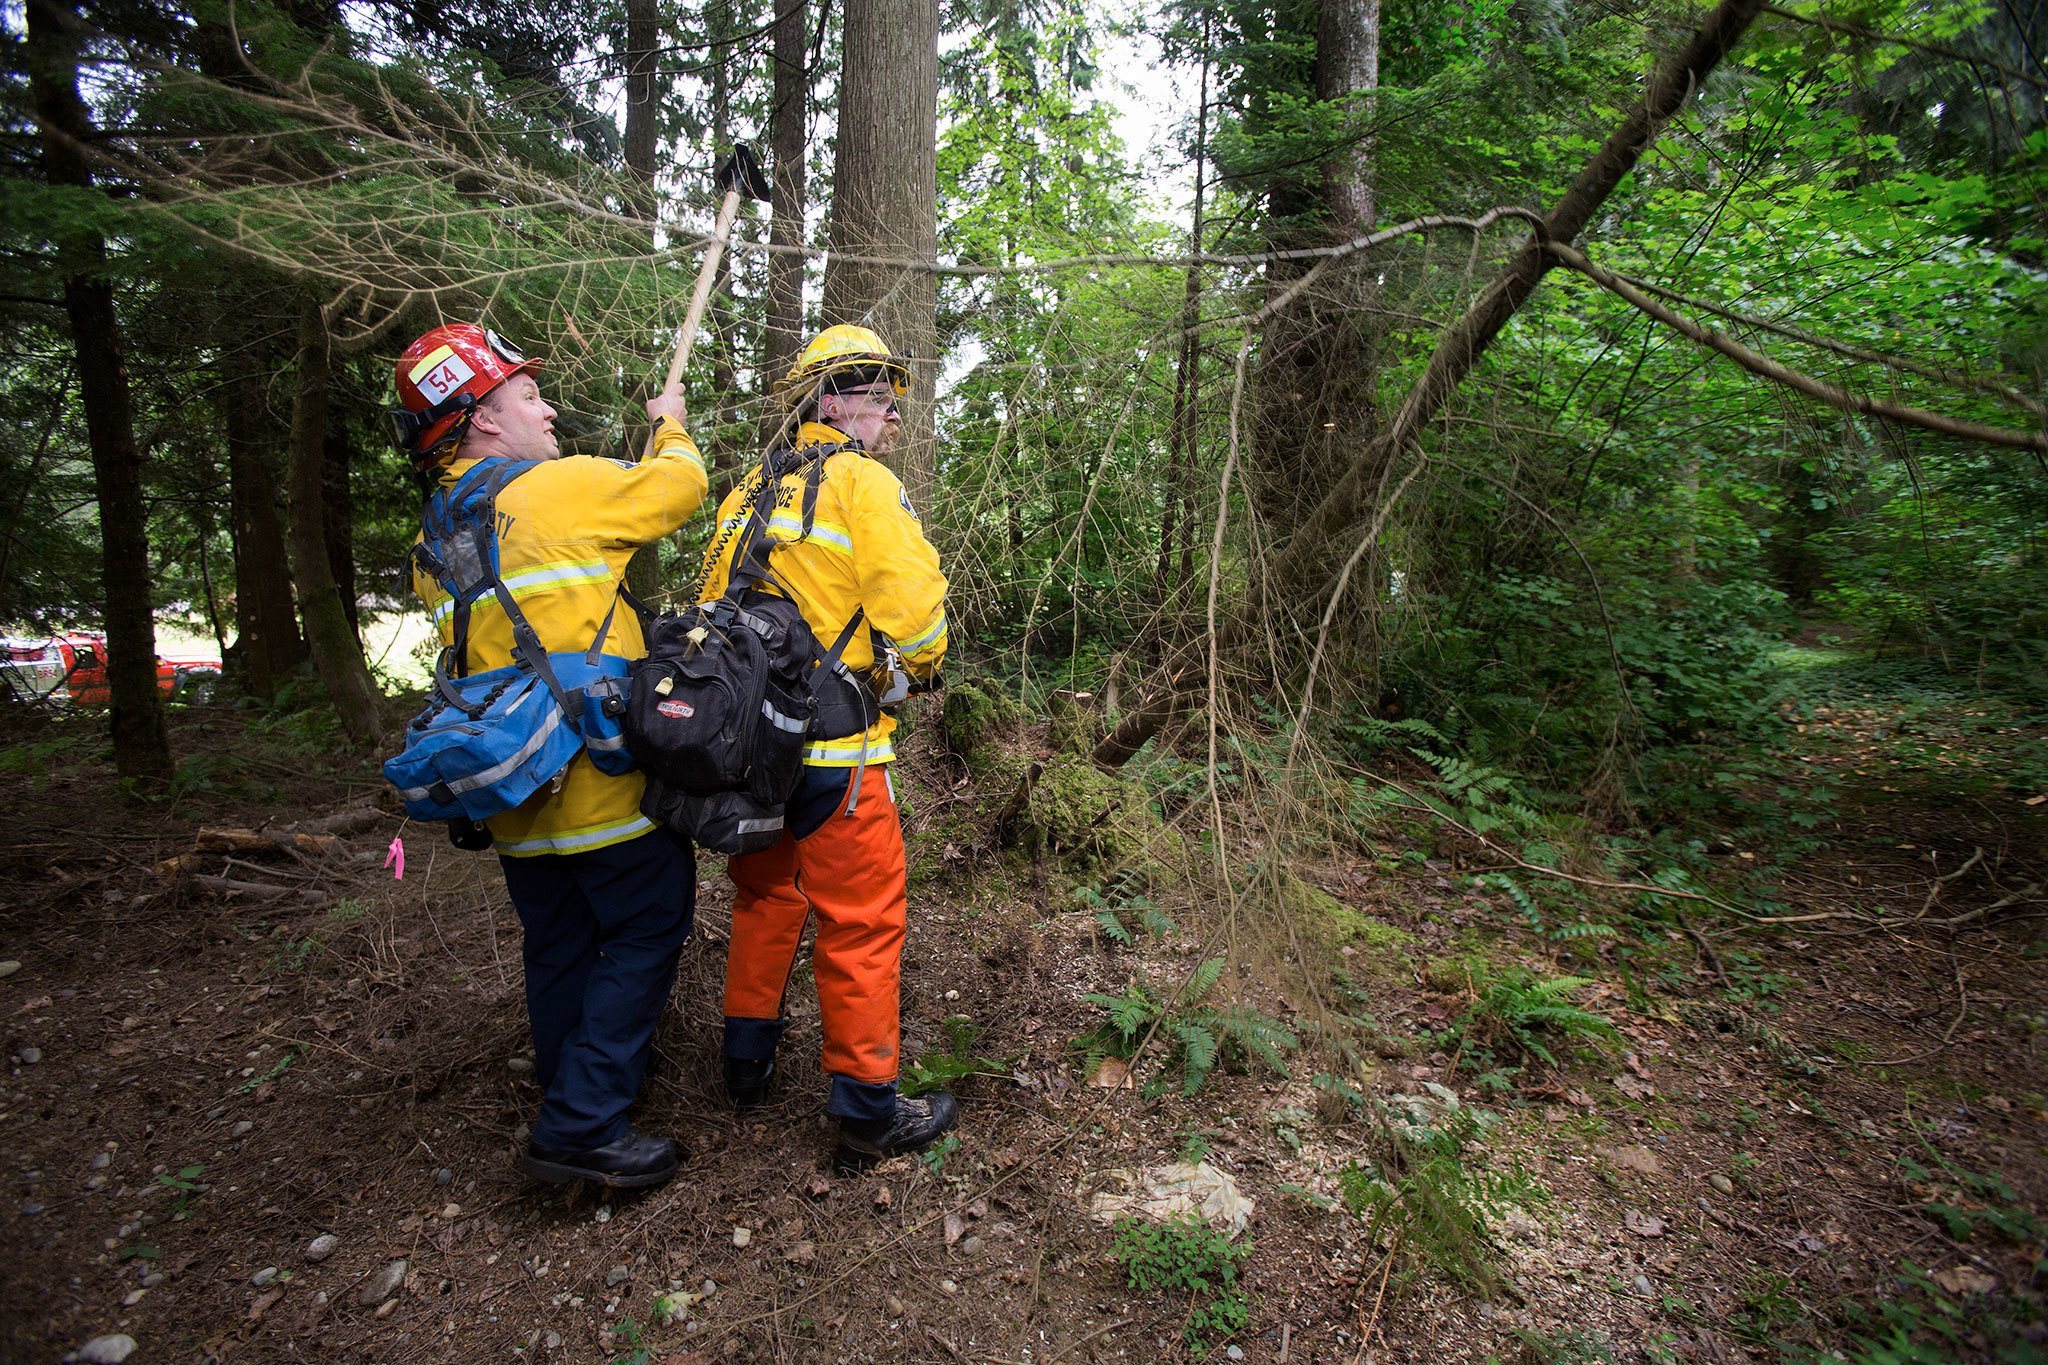 Snohomish County Fire District 26 Lt. Scott Coulson shields volunteer firefighter Schuyler Murphy from the limbs of a falling tree as they create “defensible space” during practice for the wildfire season on Wednesday in Gold Bar. (Andy Bronson / The Herald)